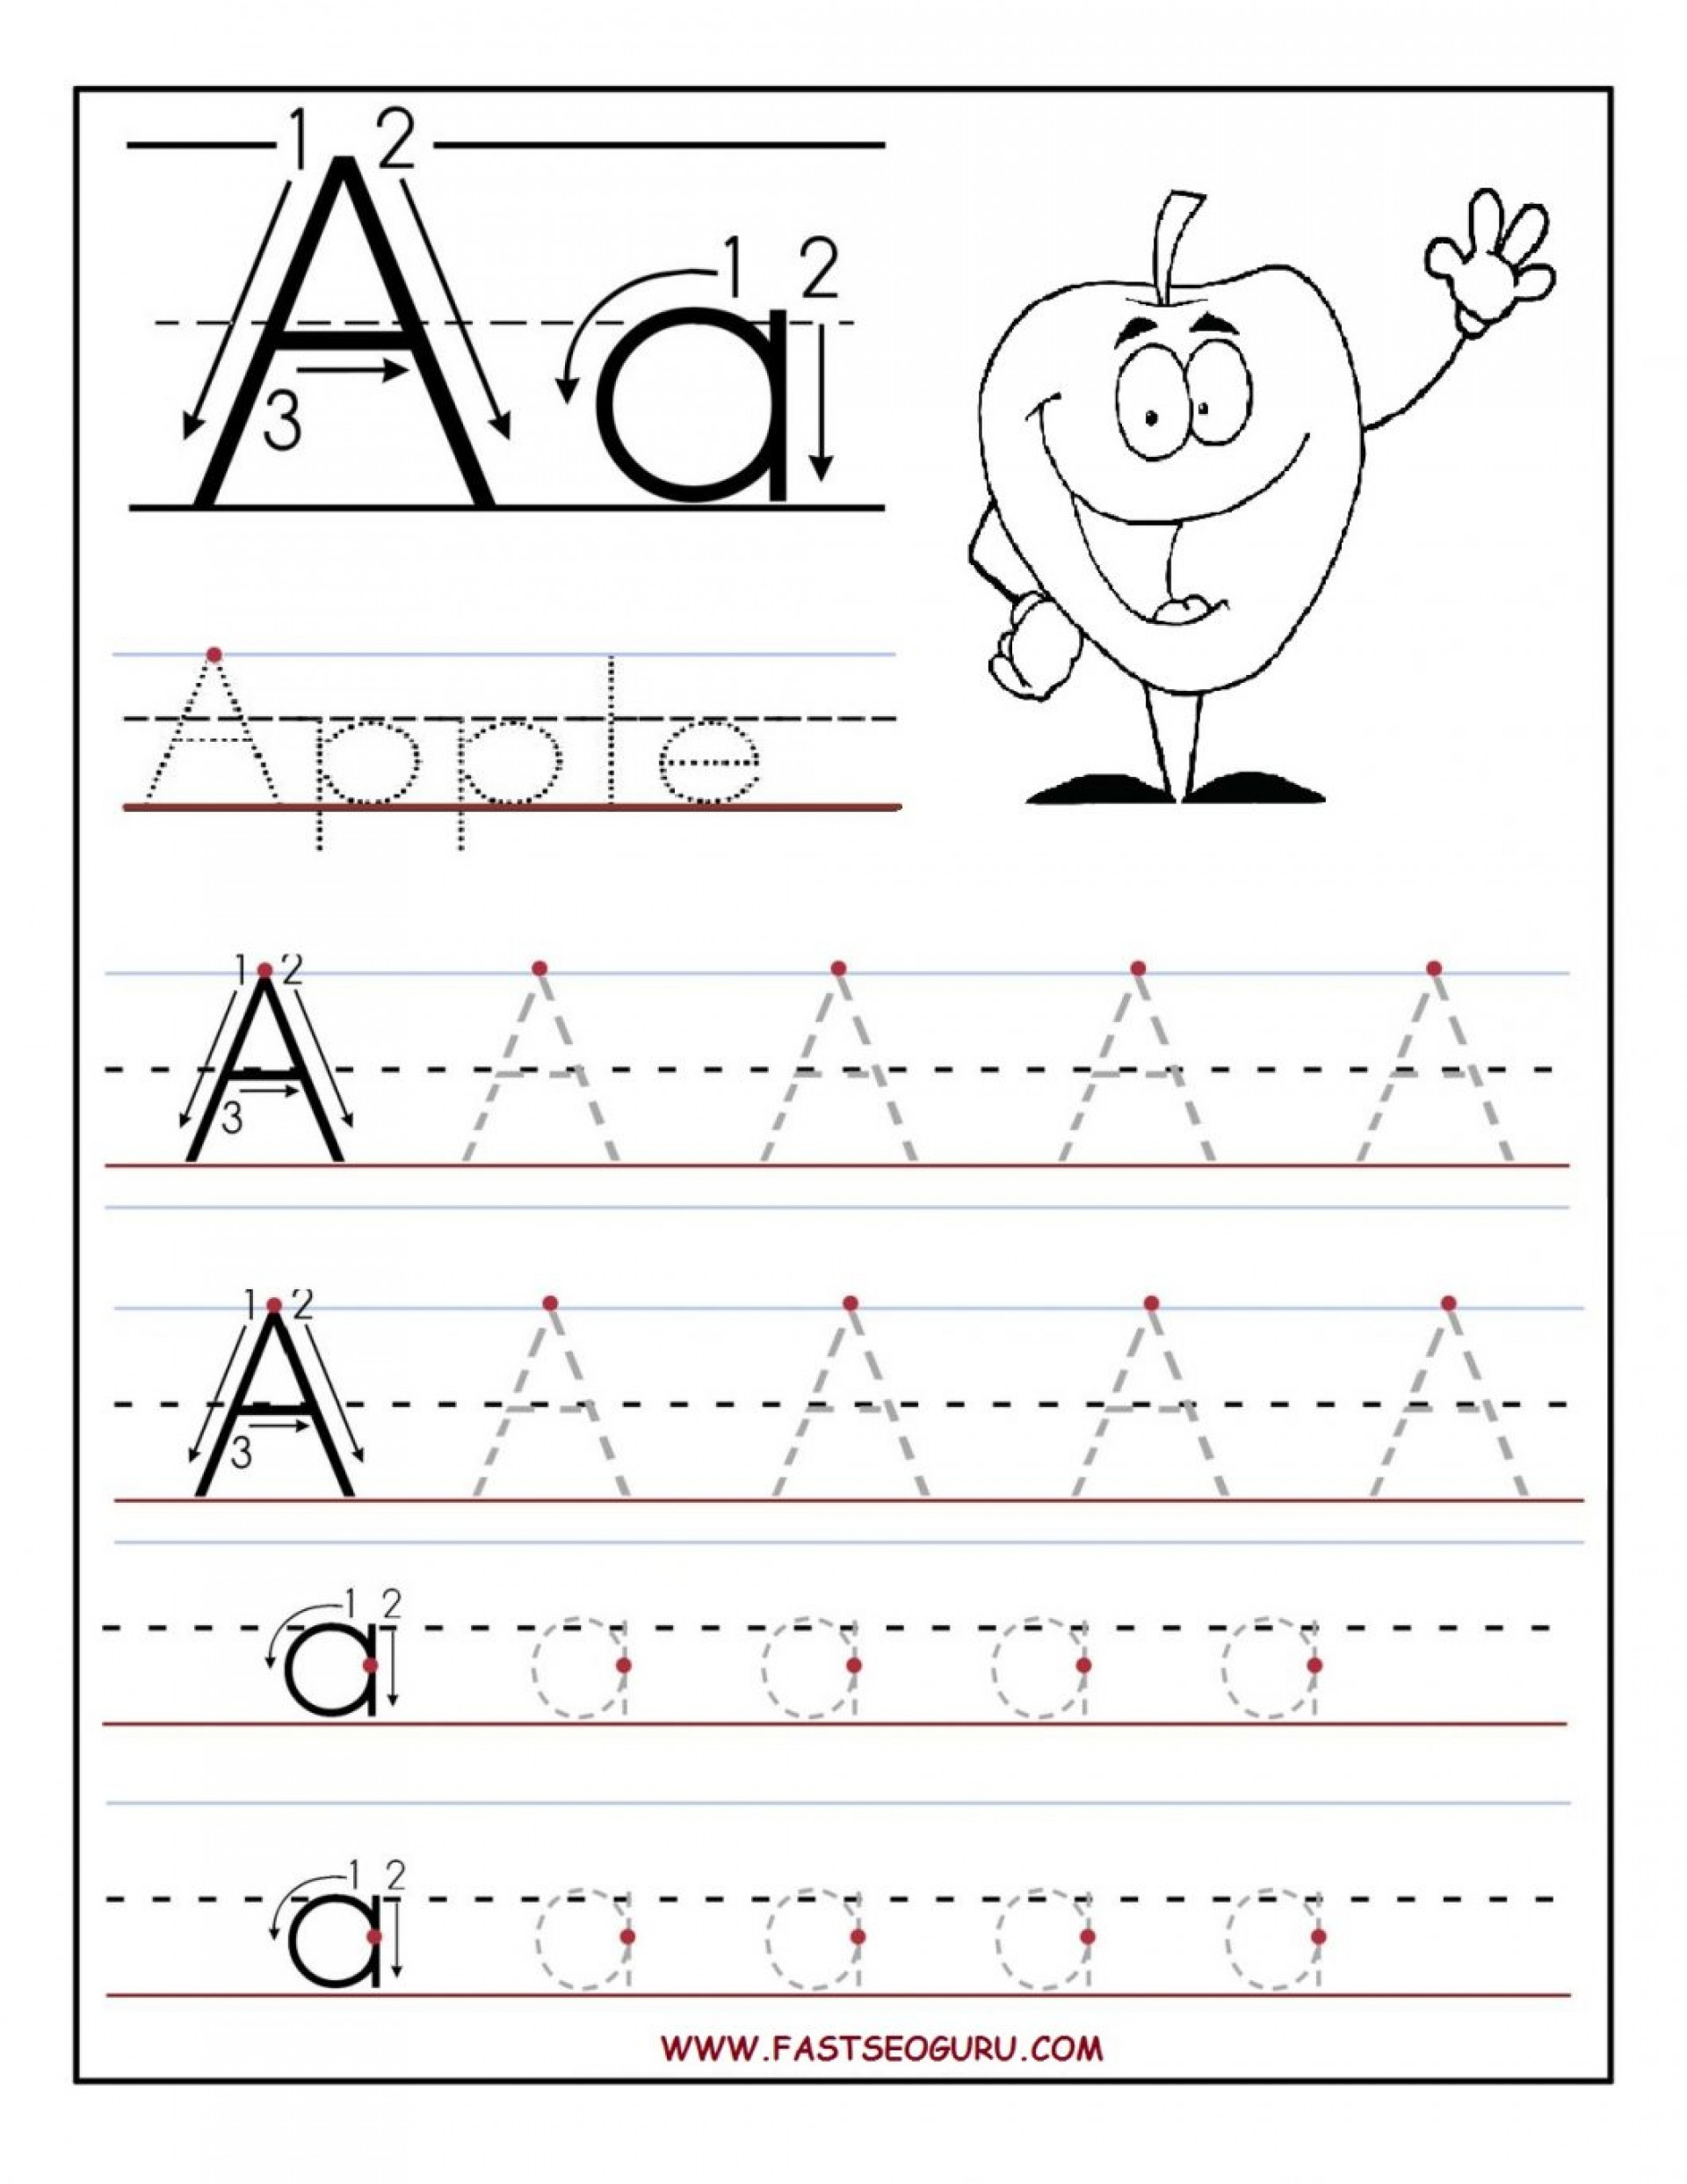 Coloring Book : Coloring Book Worksheet Trace Letters regarding Letter A Tracing Worksheets